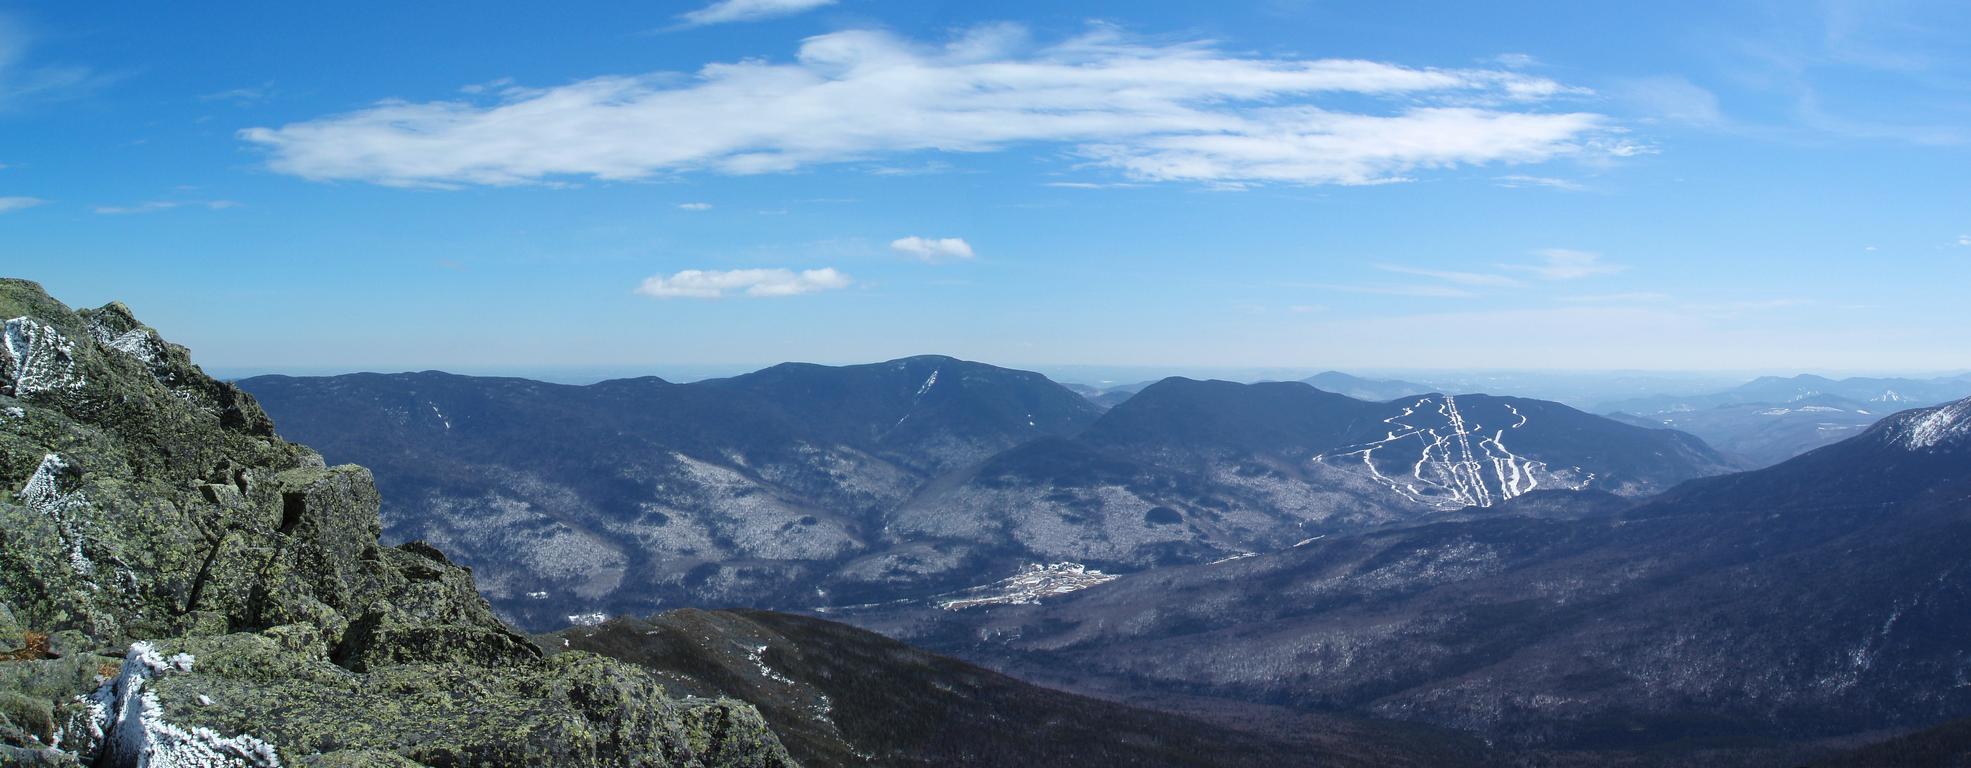 panoramic view in March of the Carter-Wildcat Range from Mount Madison in the White Mountains of New Hampshire